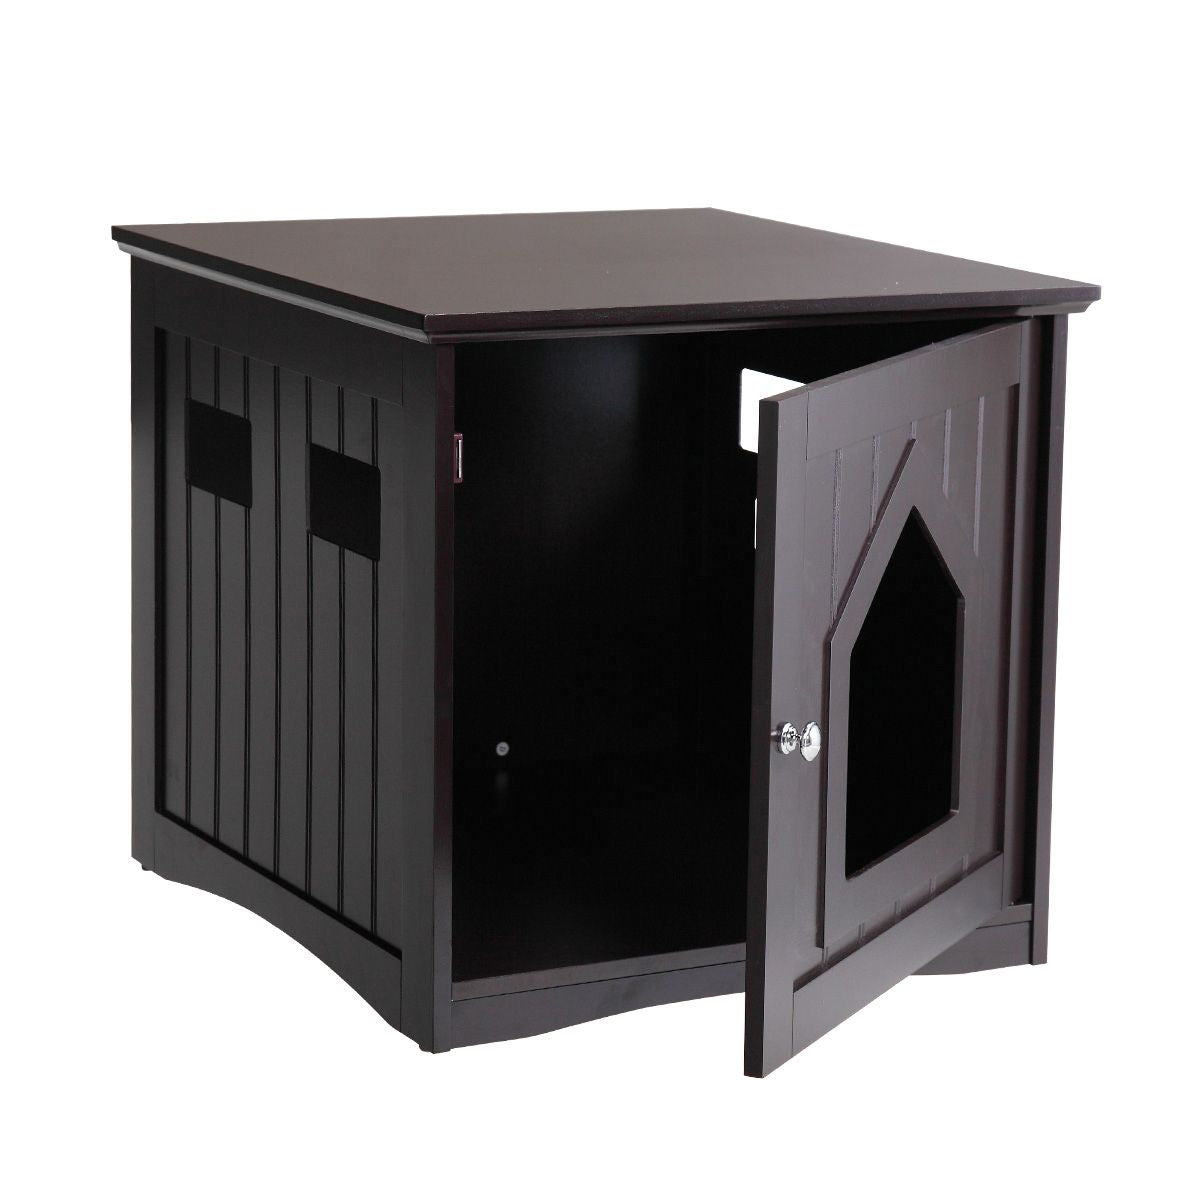 SHICHENG Decorative Cat House & Side Table - Cat Home Covered Nightstand - Indoor Pet Crate - Litter Box Enclosure - Hooded Hidden Pet Box - Cats Furniture Cabinet - Kitty Washroom Animals & Pet Supplies > Pet Supplies > Cat Supplies > Cat Furniture SHICHENG   